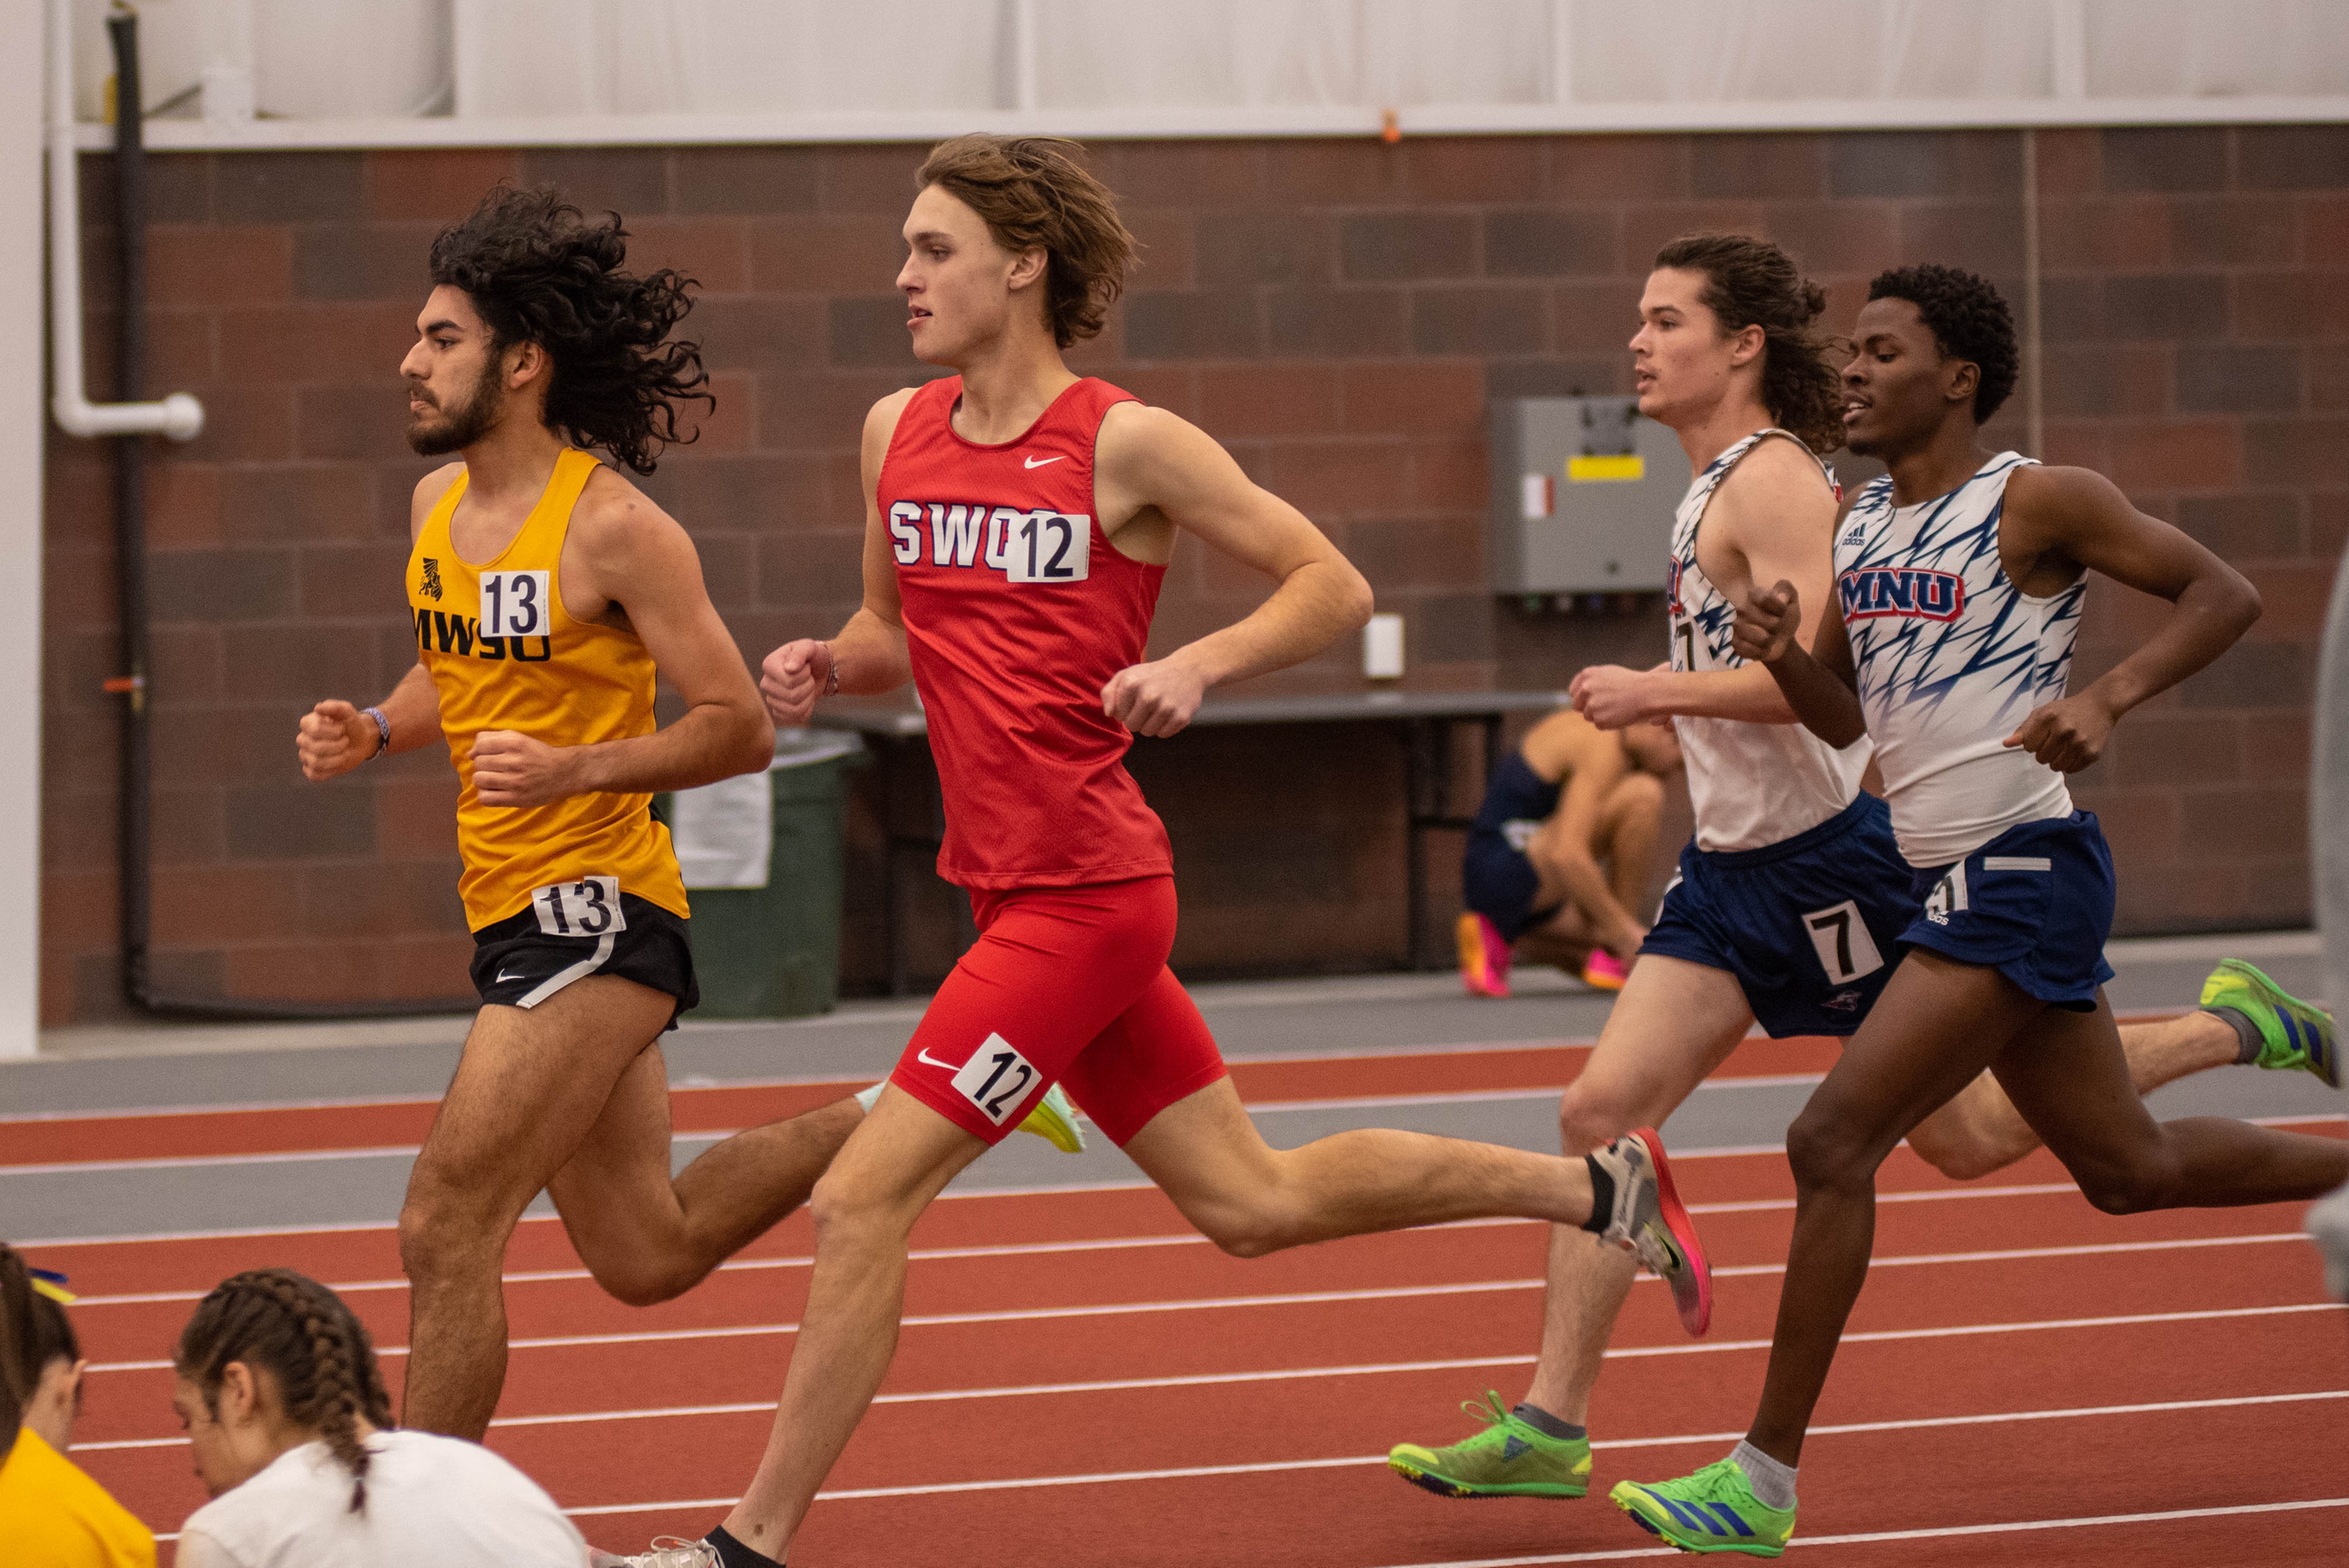 Chase Oates runs the mile at the Northwest Open